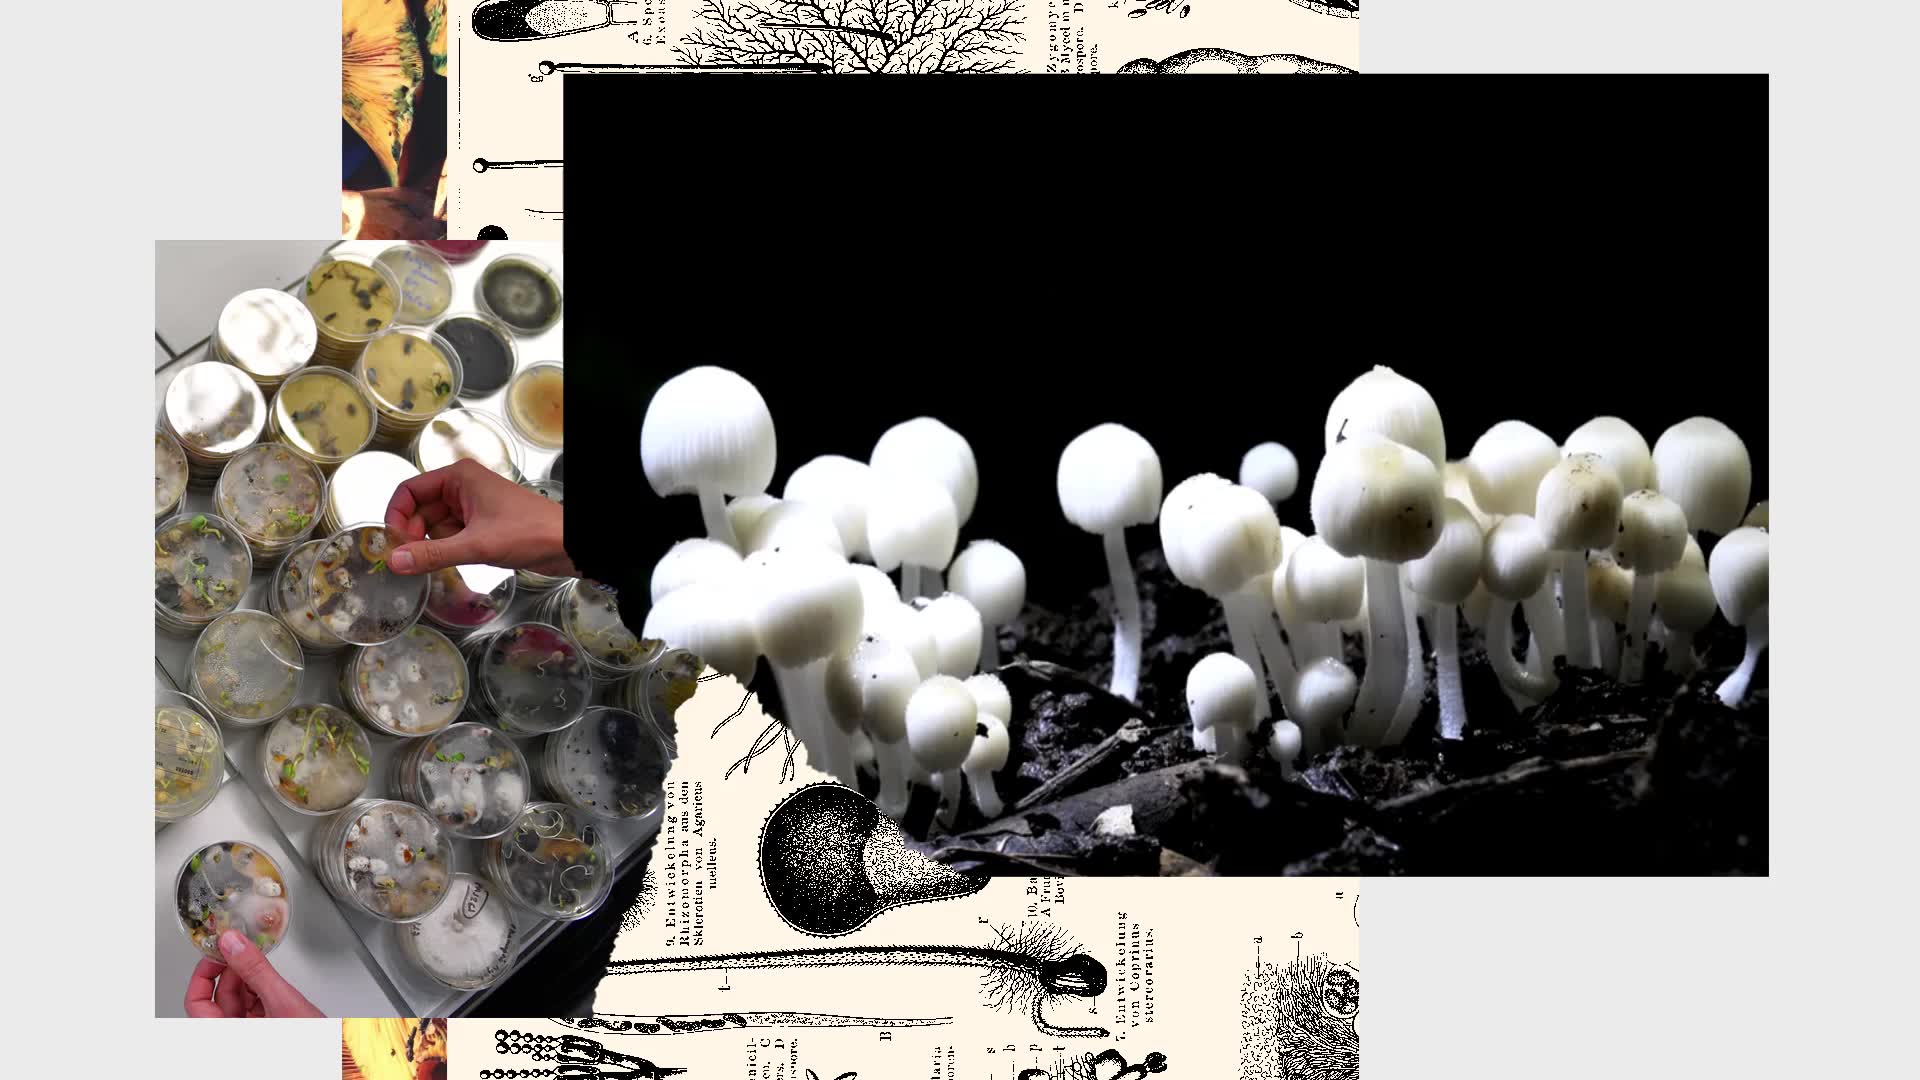 The various benefits of online buying of magic mushrooms